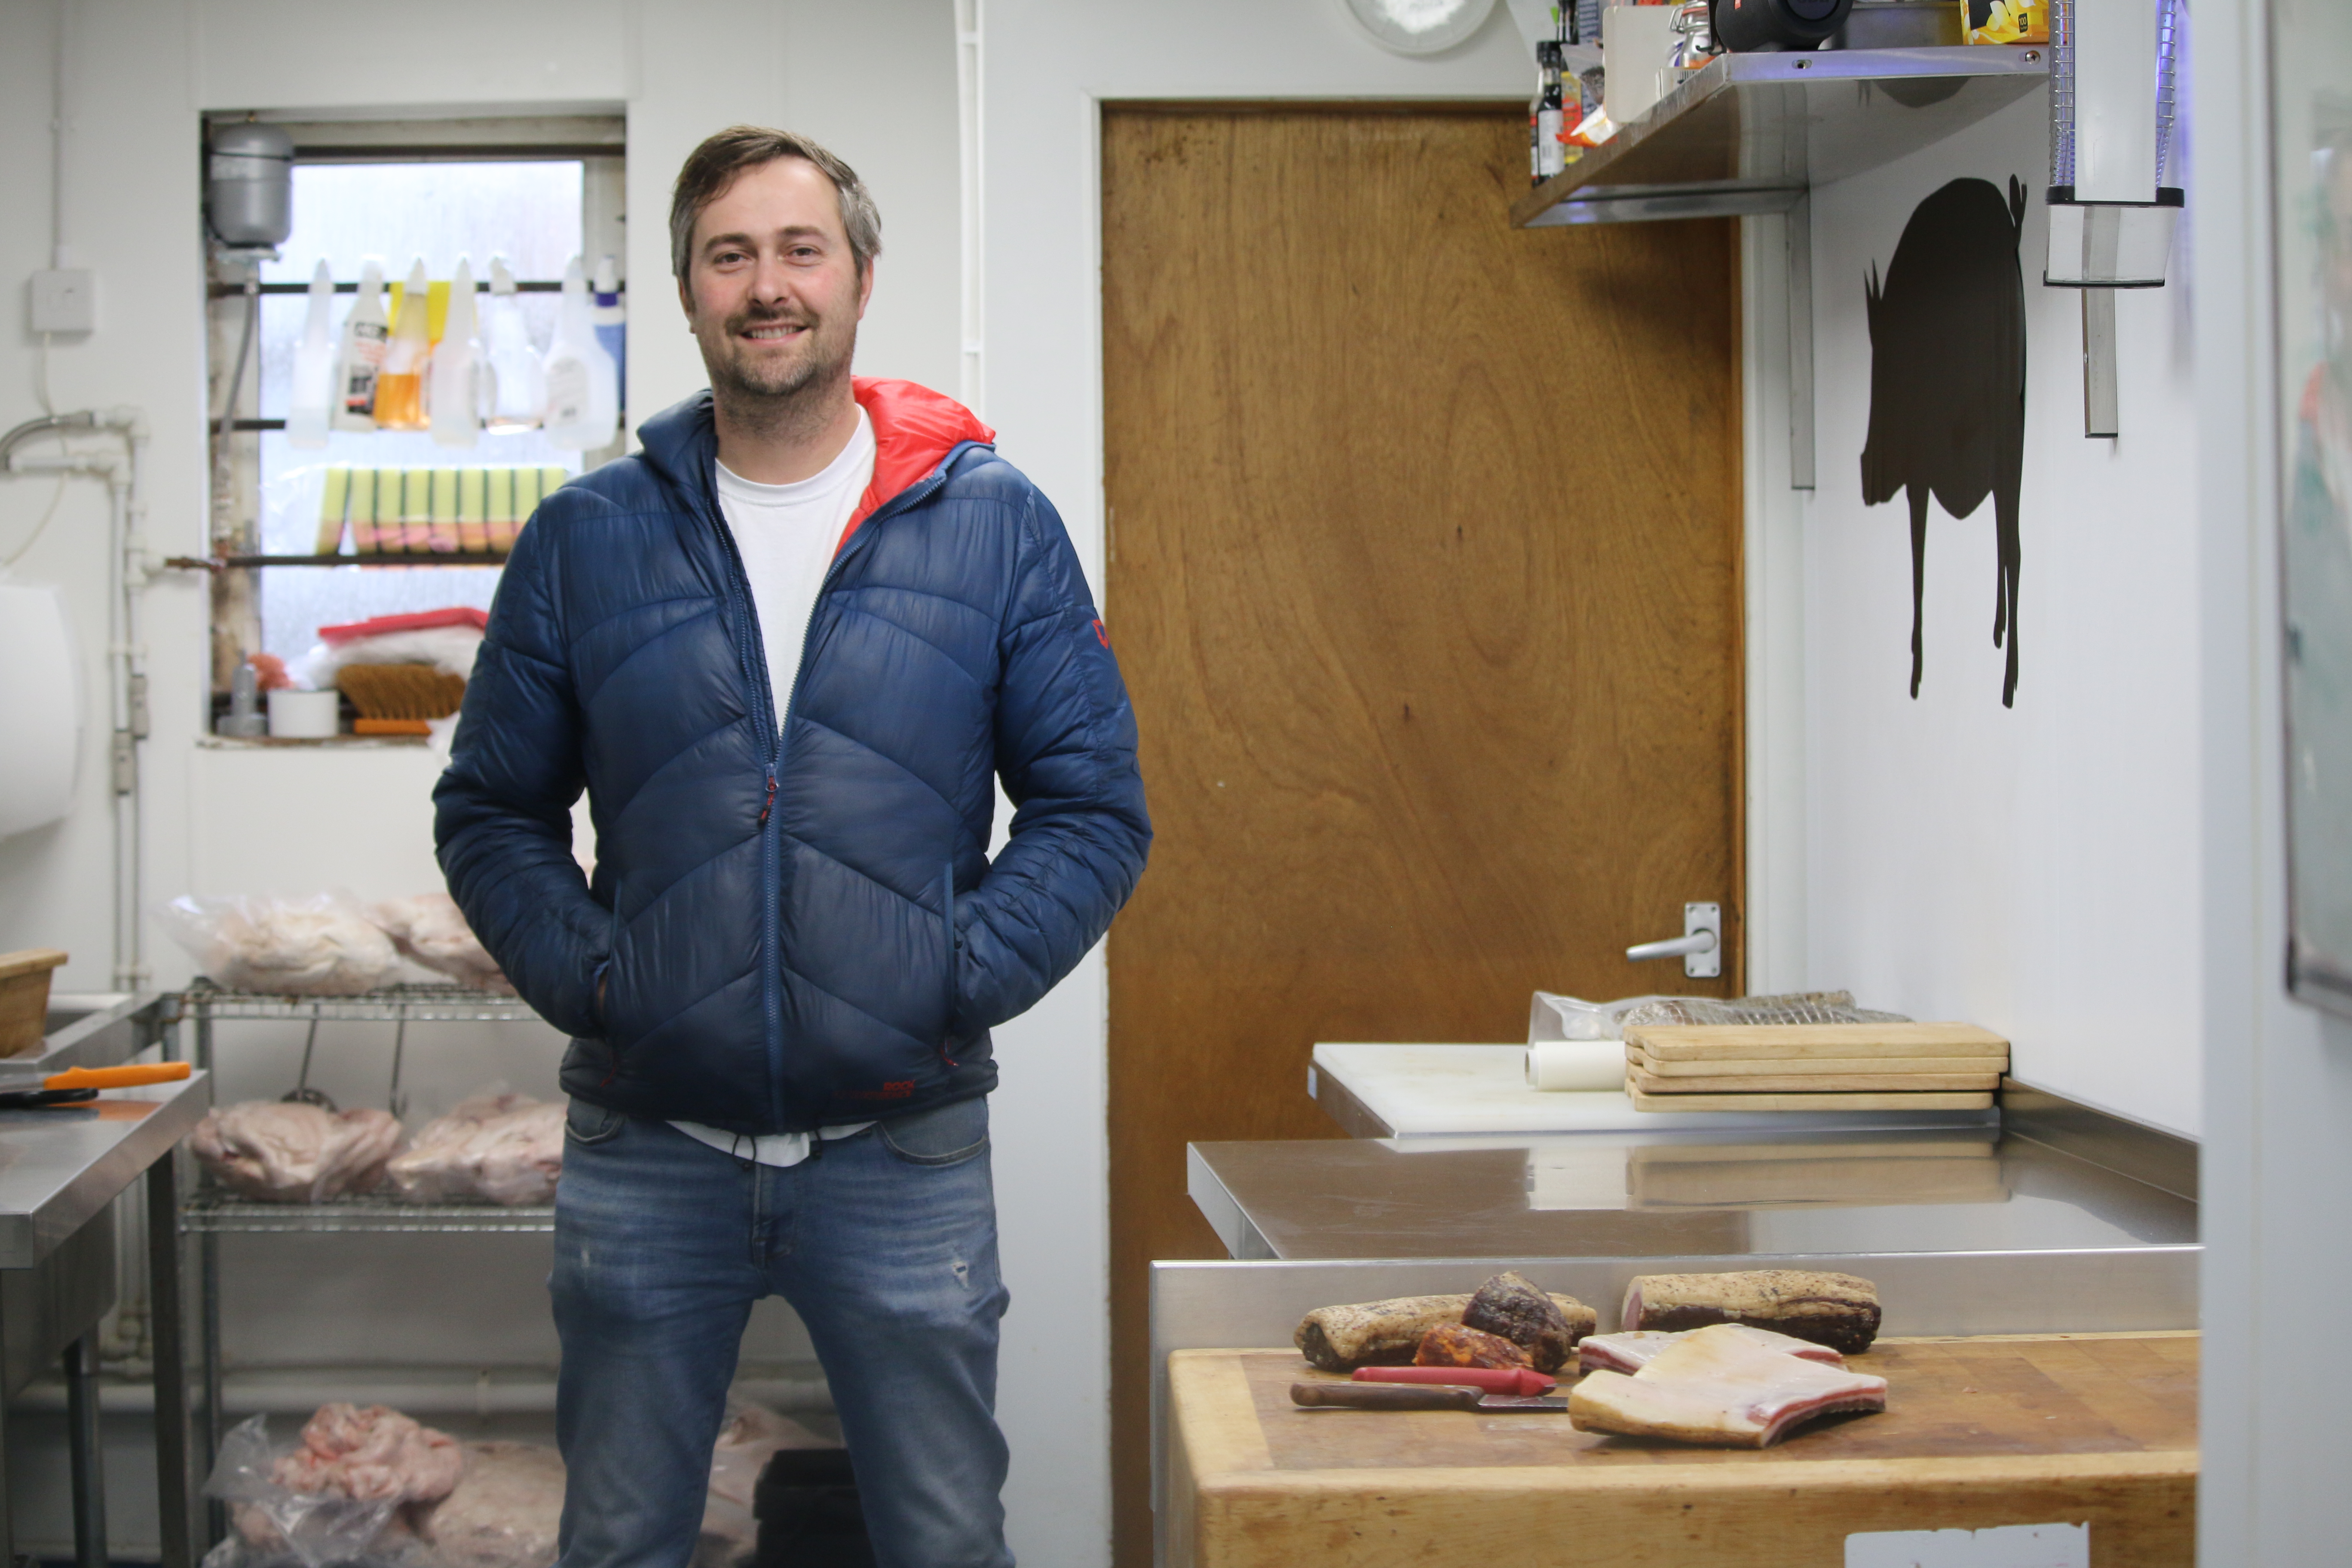 Established in the Cotswolds in the UK in 2016, SaltPig Curing Company is the brainchild of husband-and-wife team Ben (above) and Sam Dulley